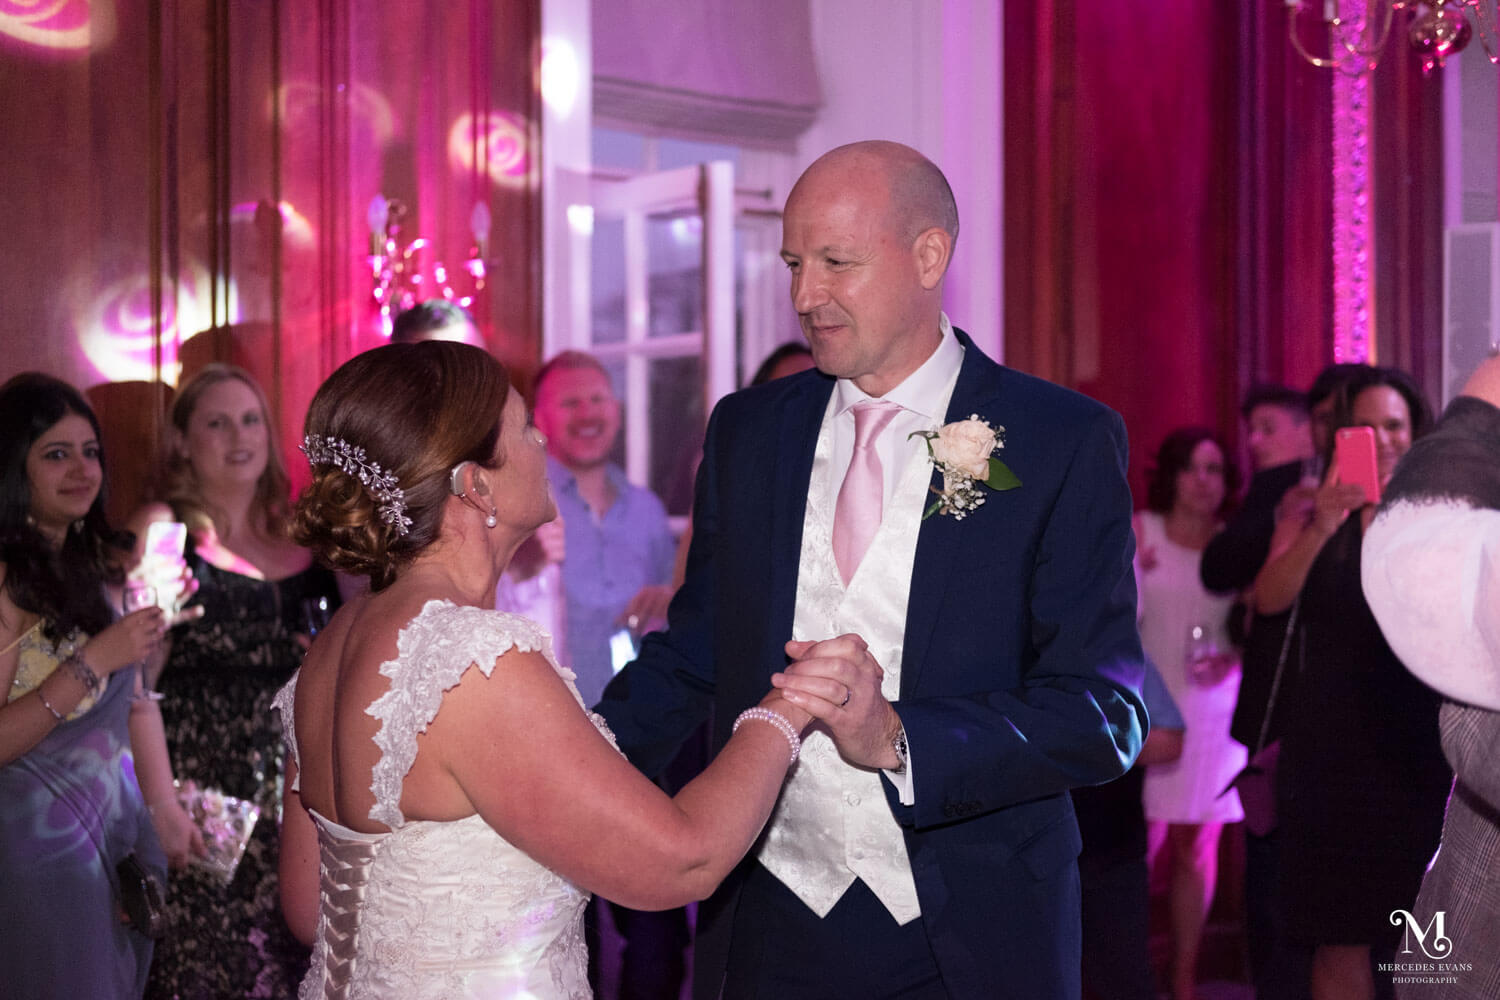 the bride and groom enjoy their first dance as their guests watch them